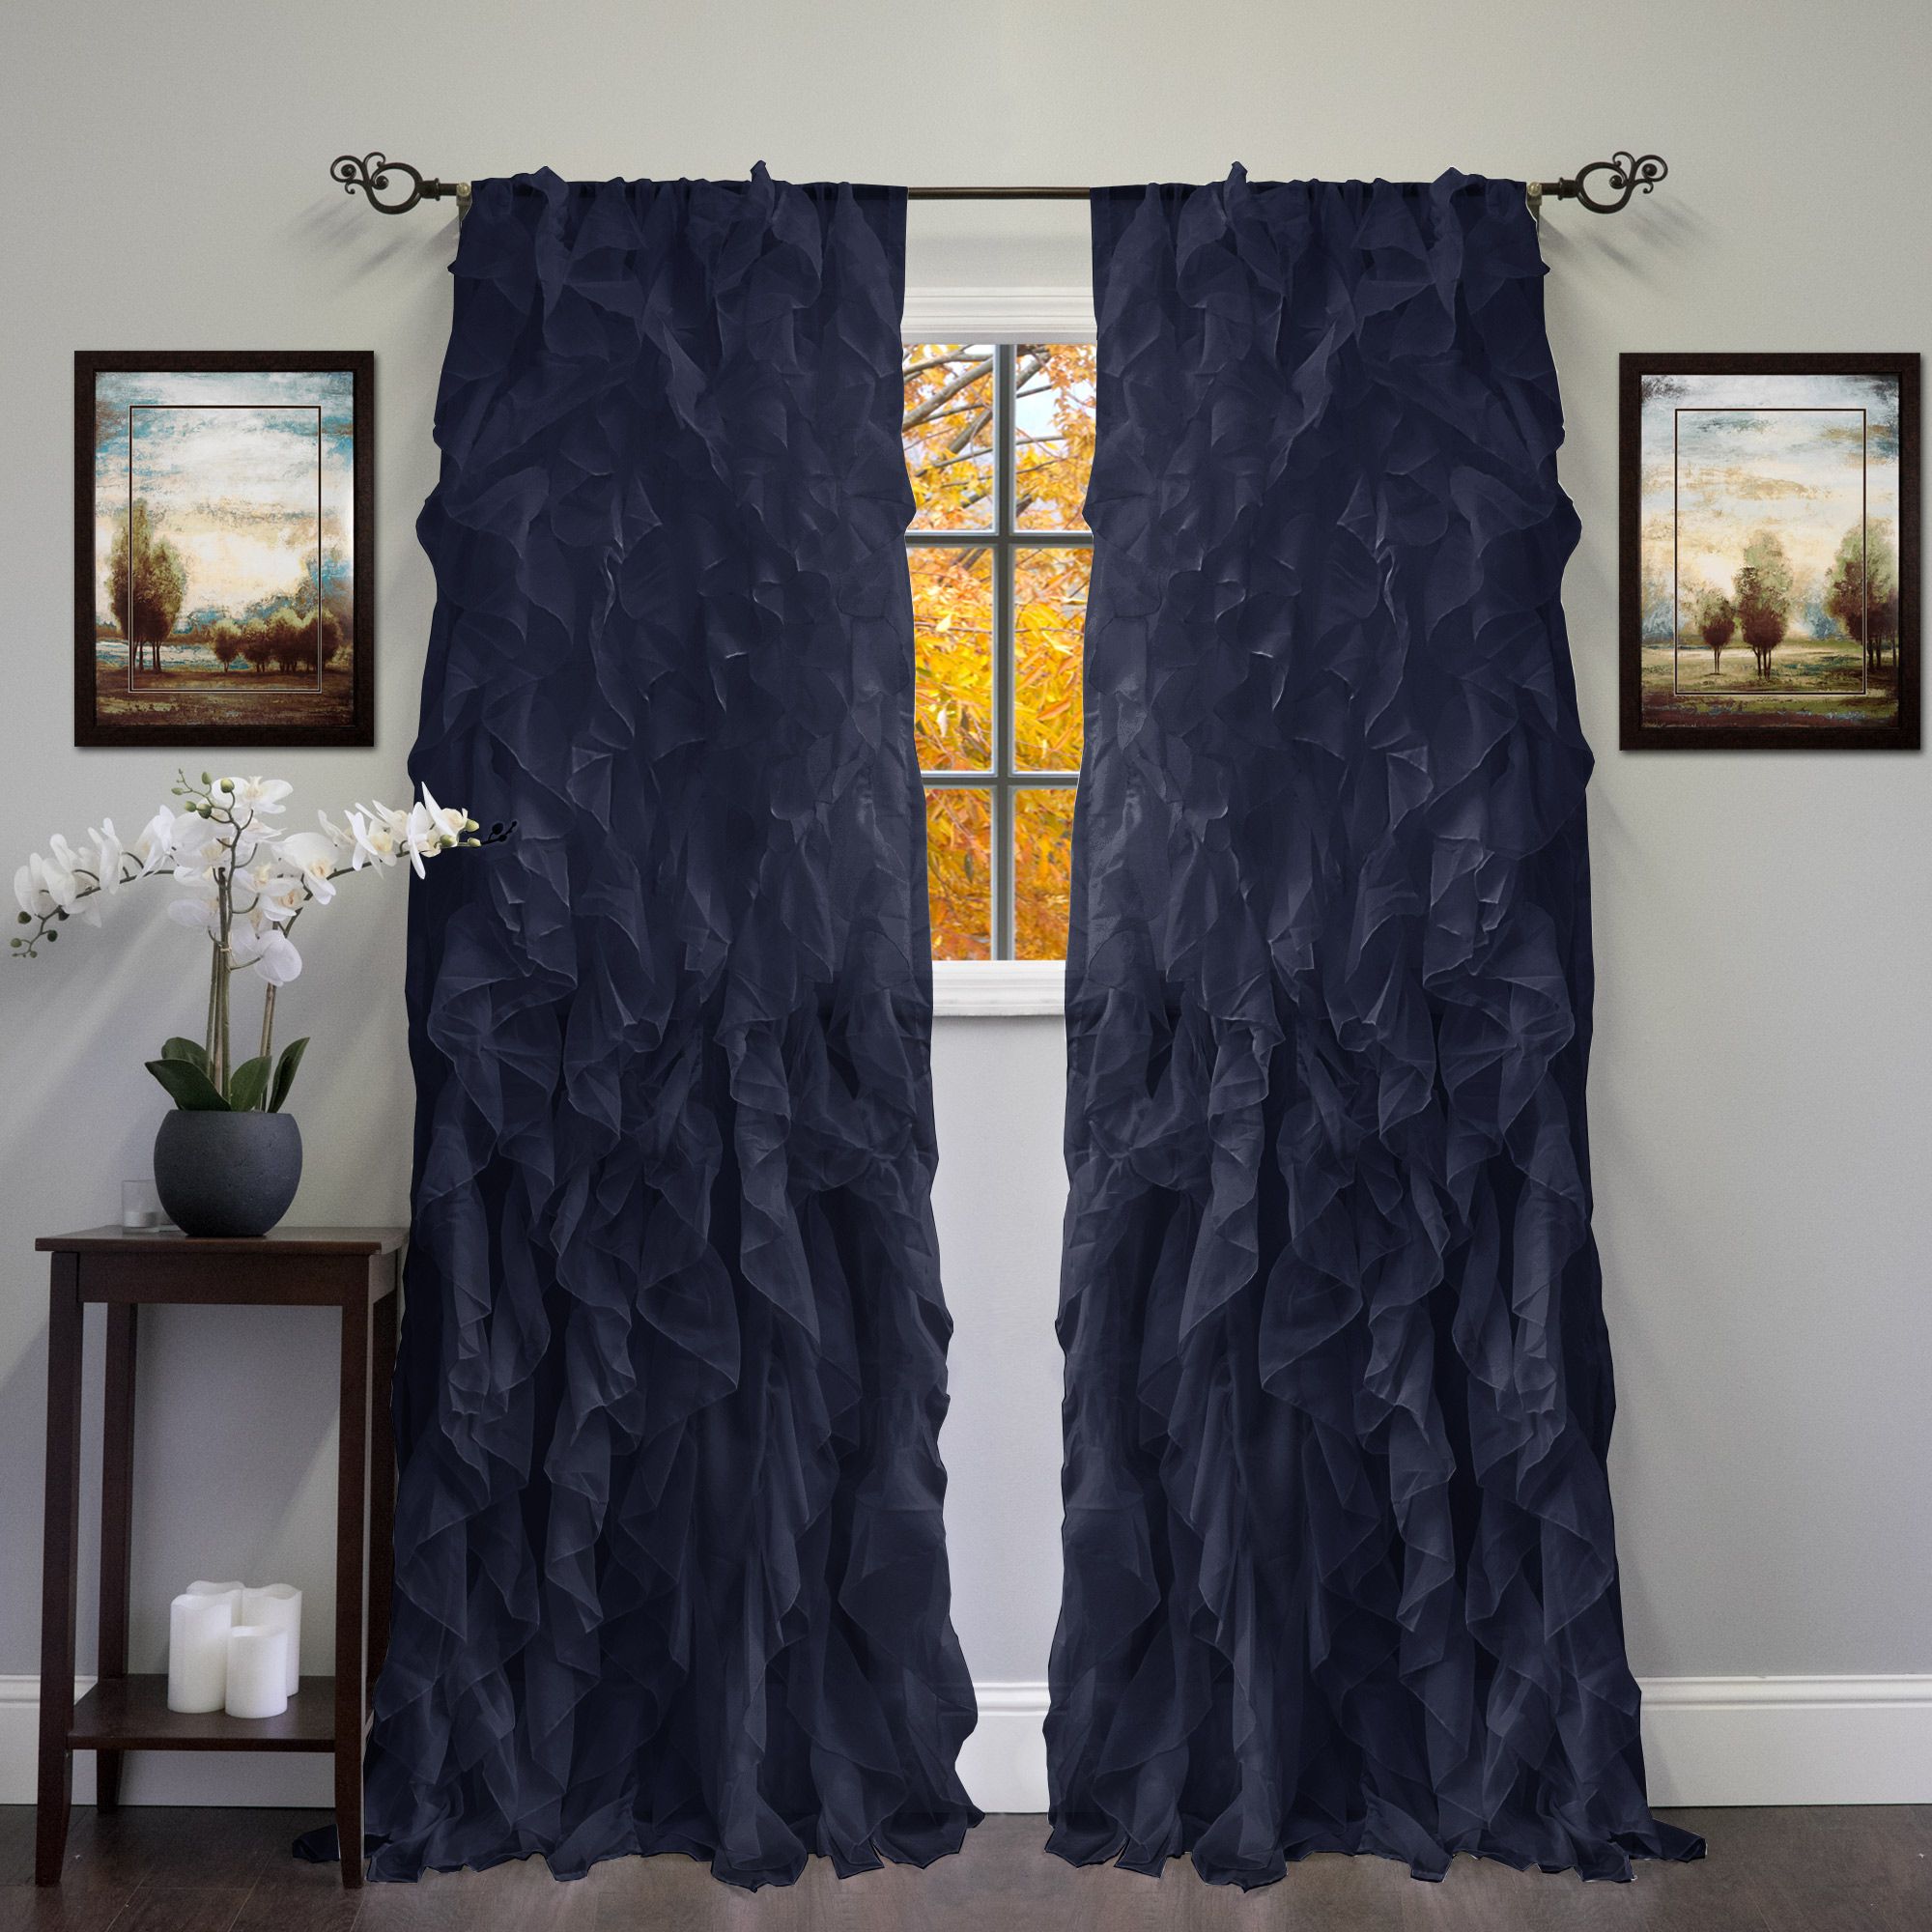 Chic Sheer Voile Vertical Ruffled Tier Window Curtain Single Panel 50" X  108" Within Sheer Voile Ruffled Tier Window Curtain Panels (View 5 of 20)